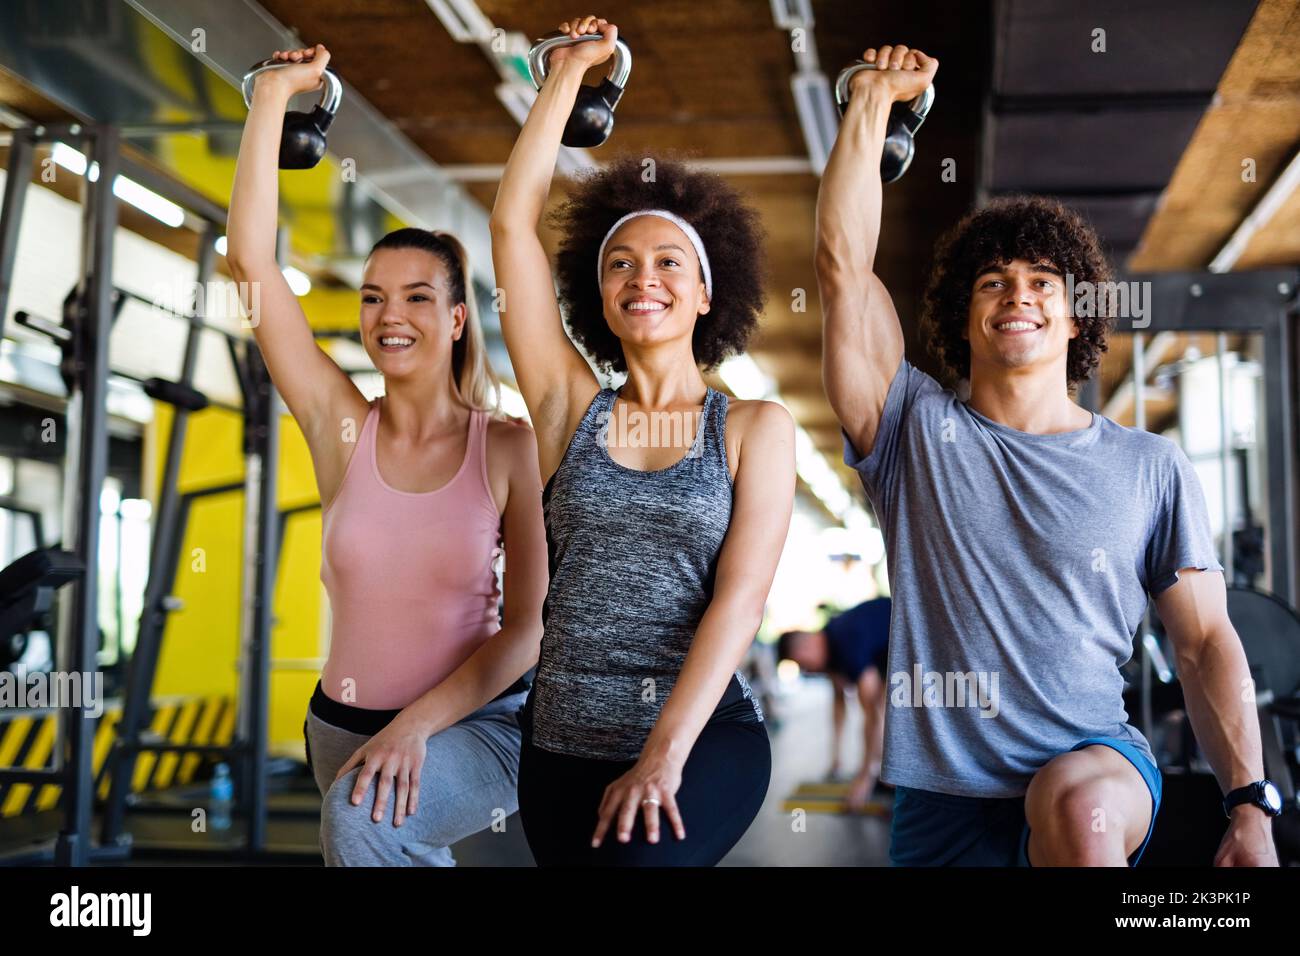 Group of fit people lifting dumbbells during an exercise class at the gym Stock Photo